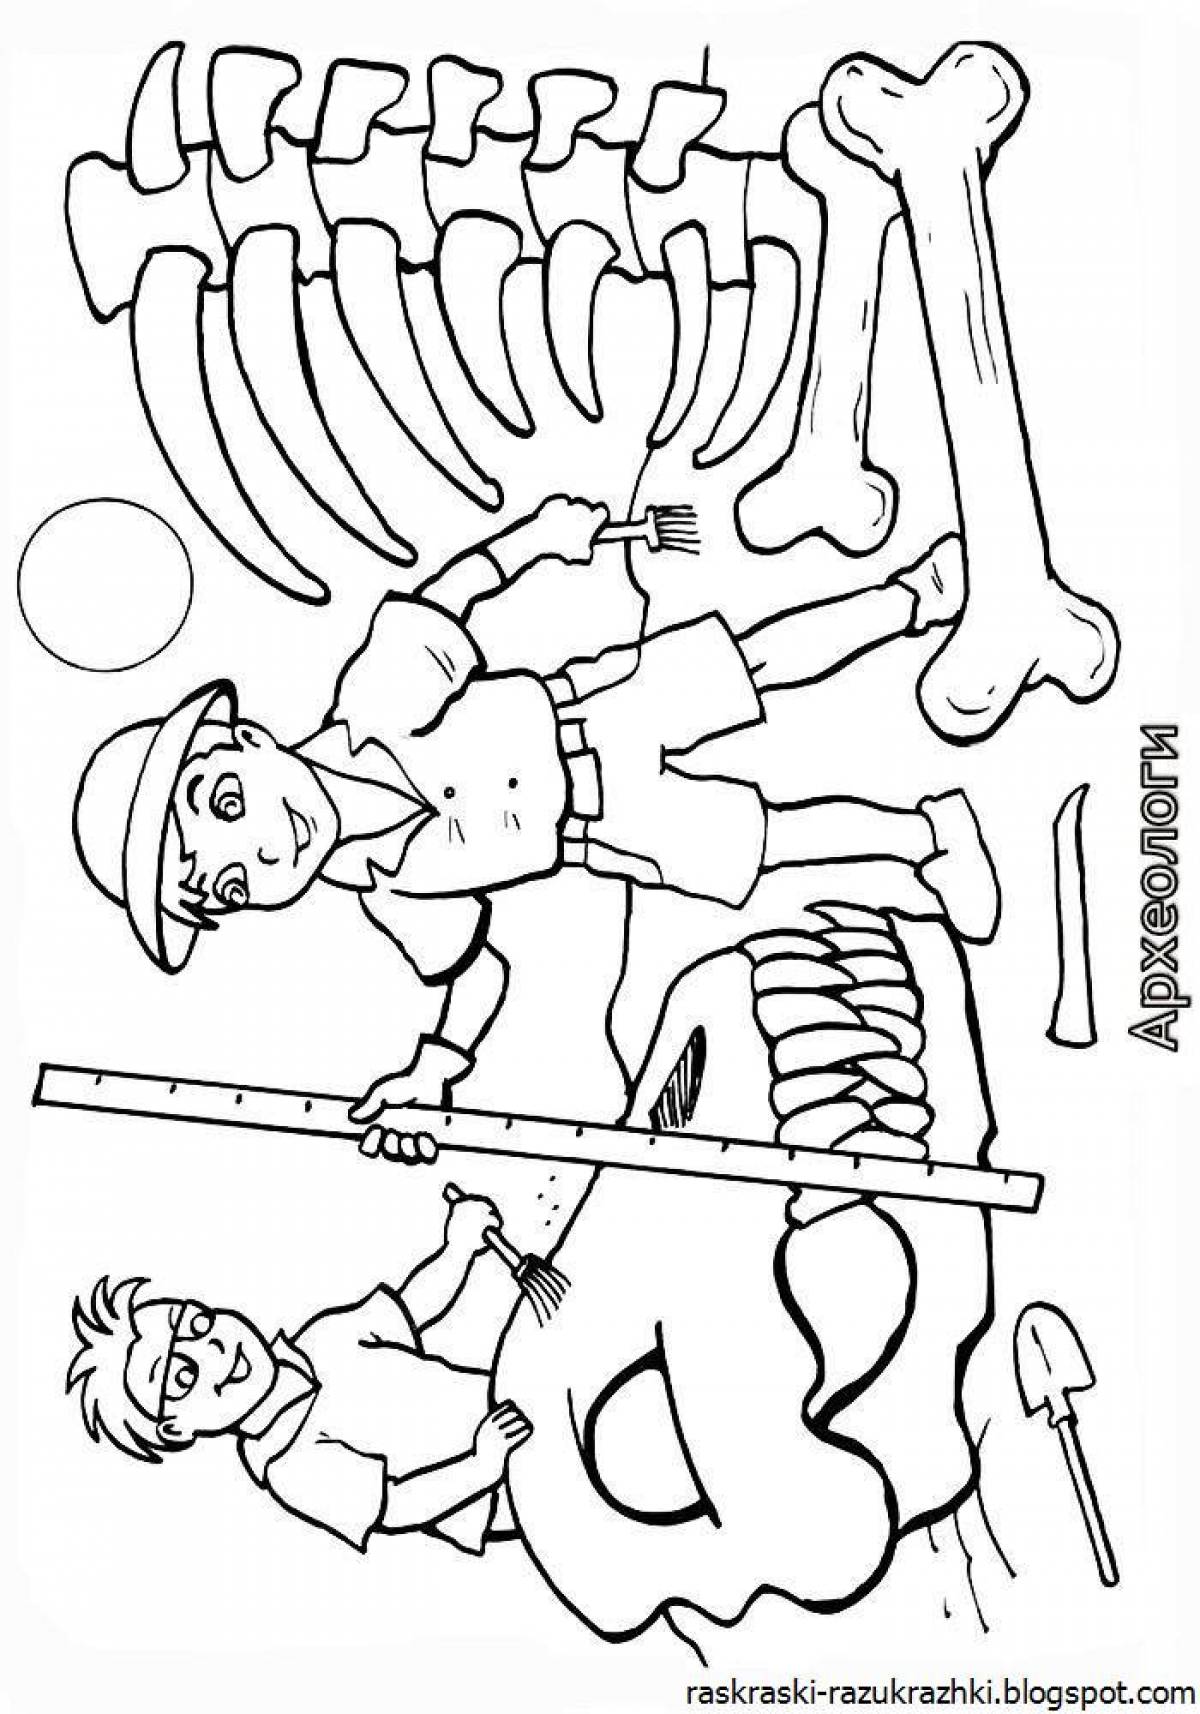 Fun job coloring pages for 4-5 year olds